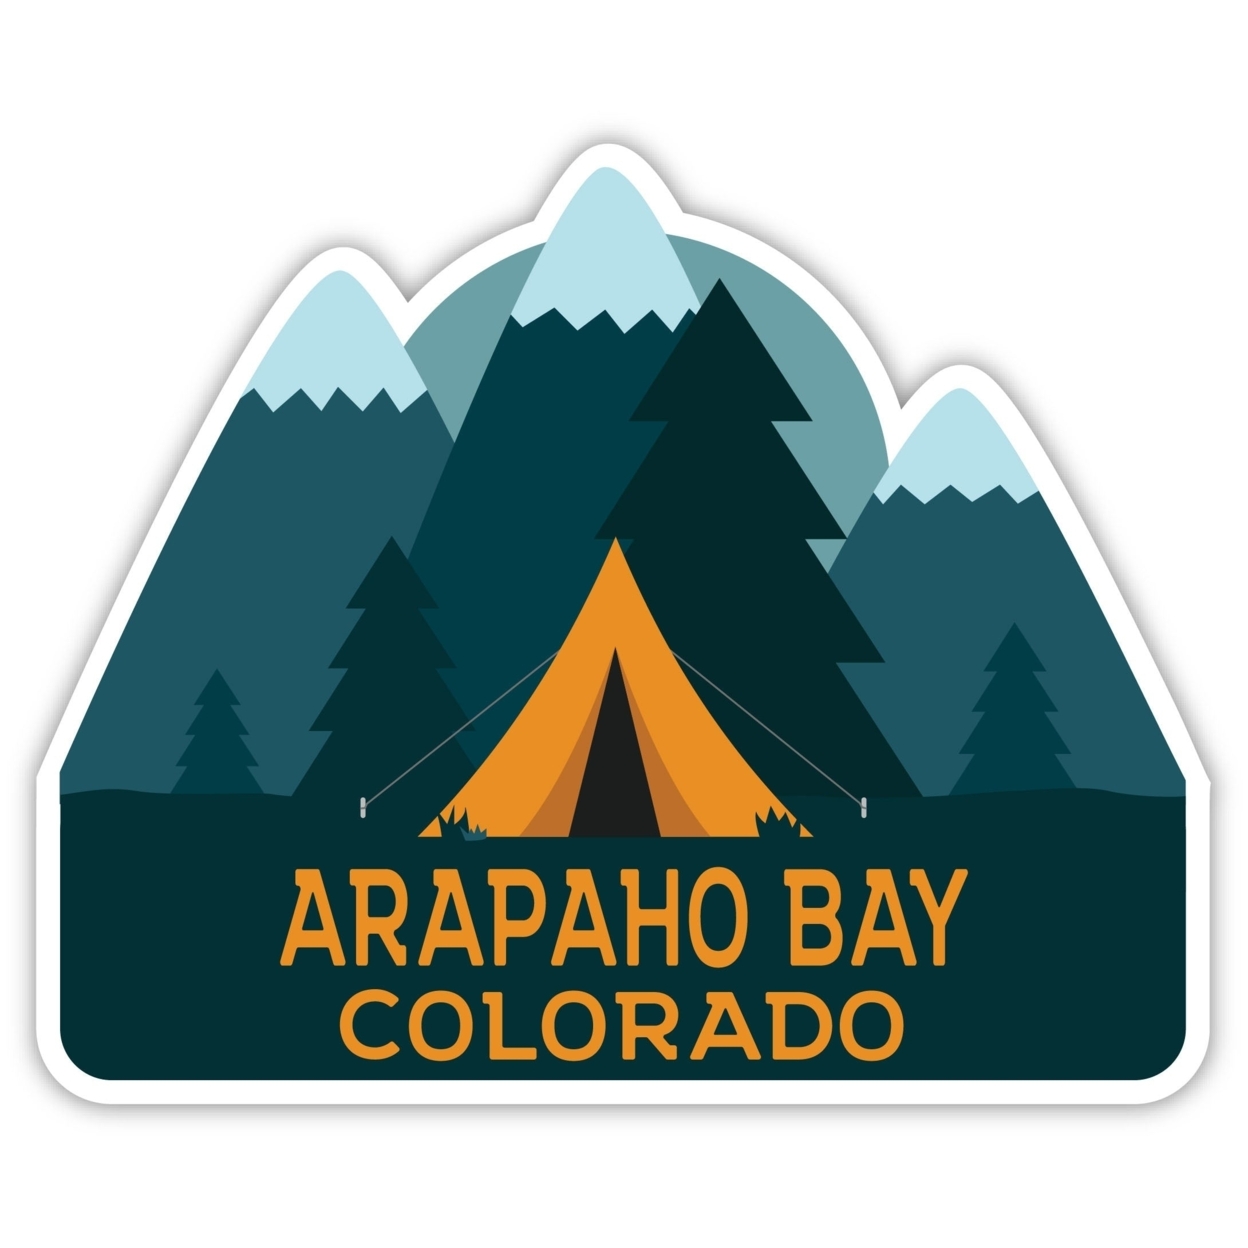 Arapaho Bay Colorado Souvenir Decorative Stickers (Choose Theme And Size) - 4-Pack, 6-Inch, Tent